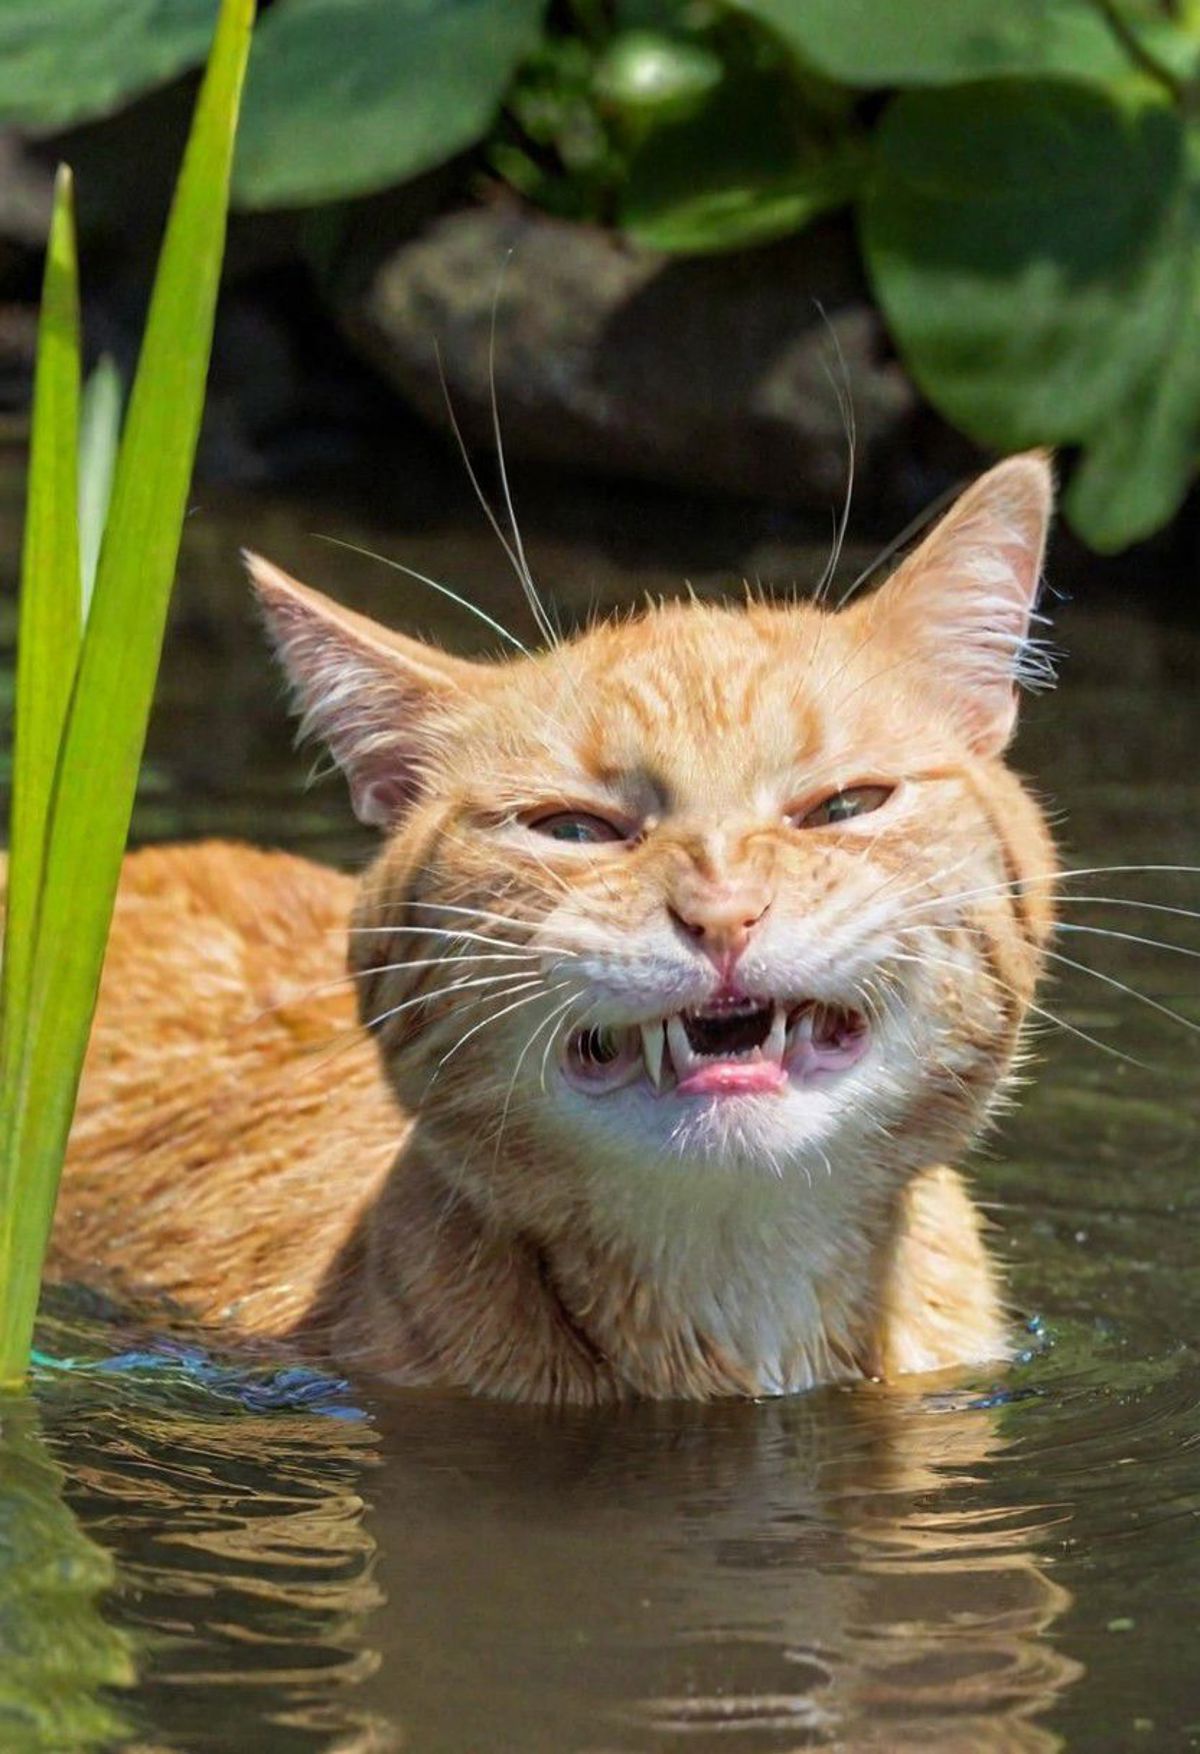 Orange tabby cat with mouth open and teeth showing, in a body of water.